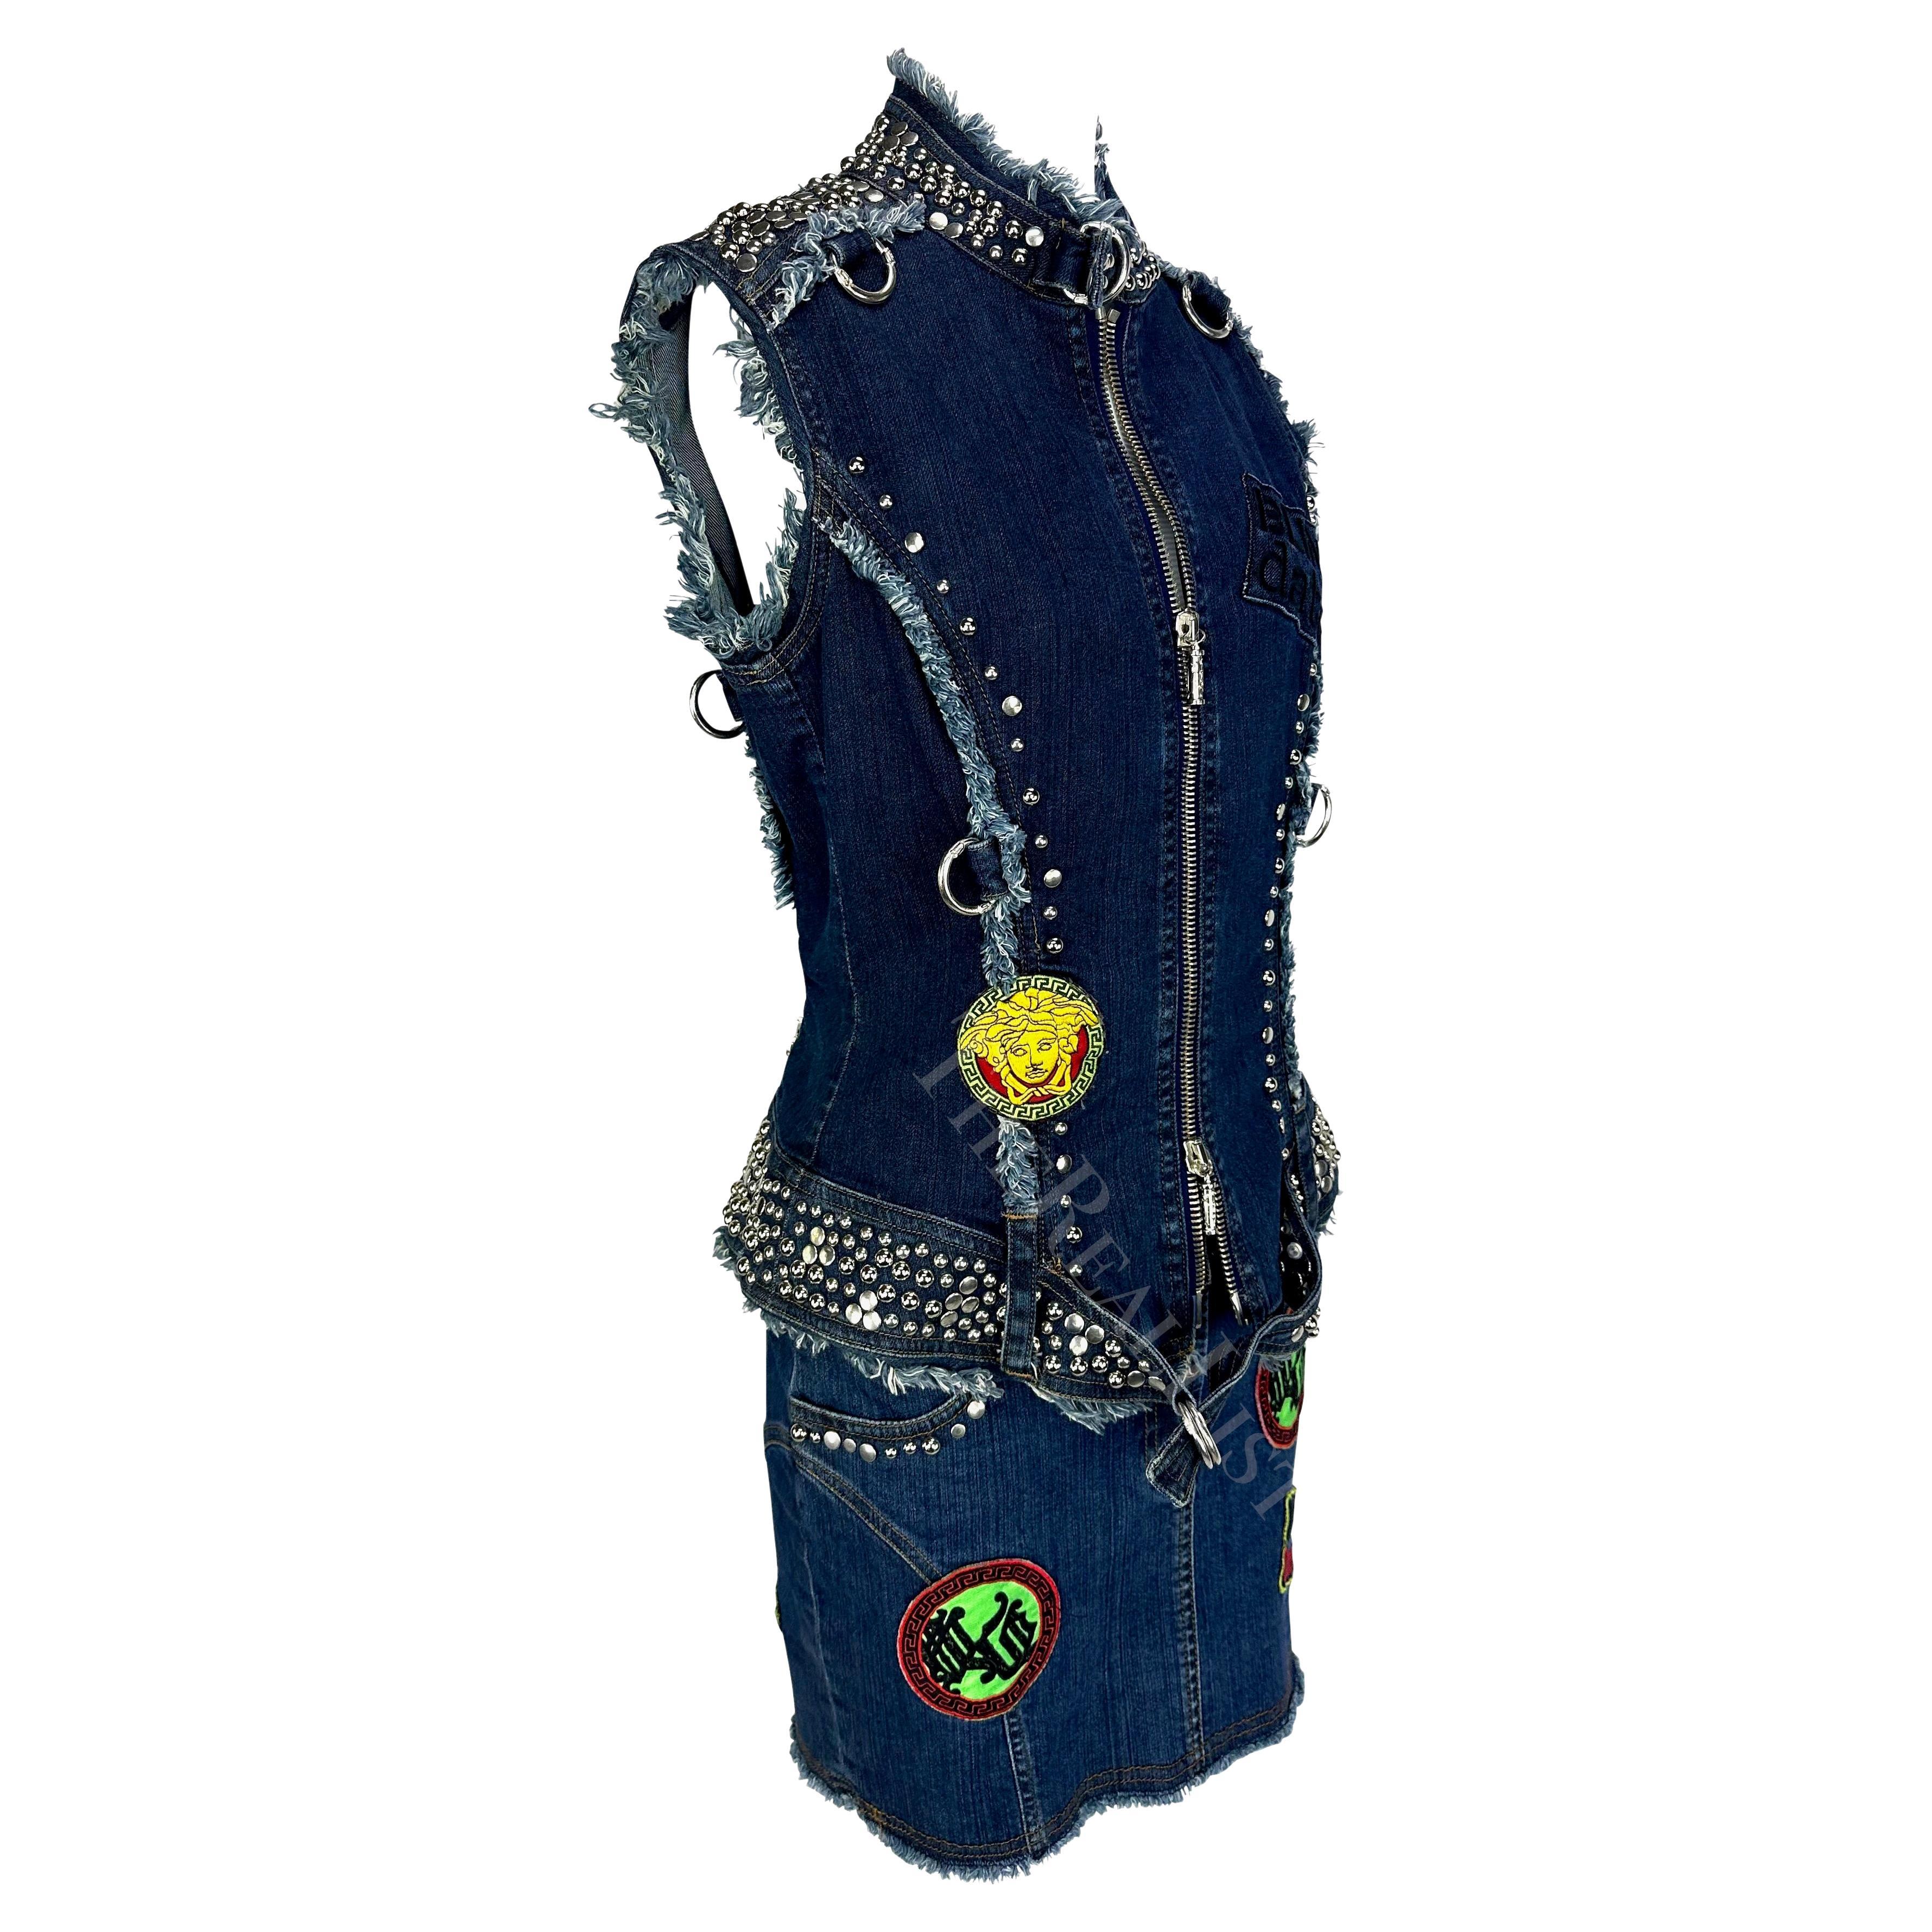 Women's S/S 2005 Versace by Donatella Chaos Couture Studded Denim Patch Vest Skirt Set For Sale